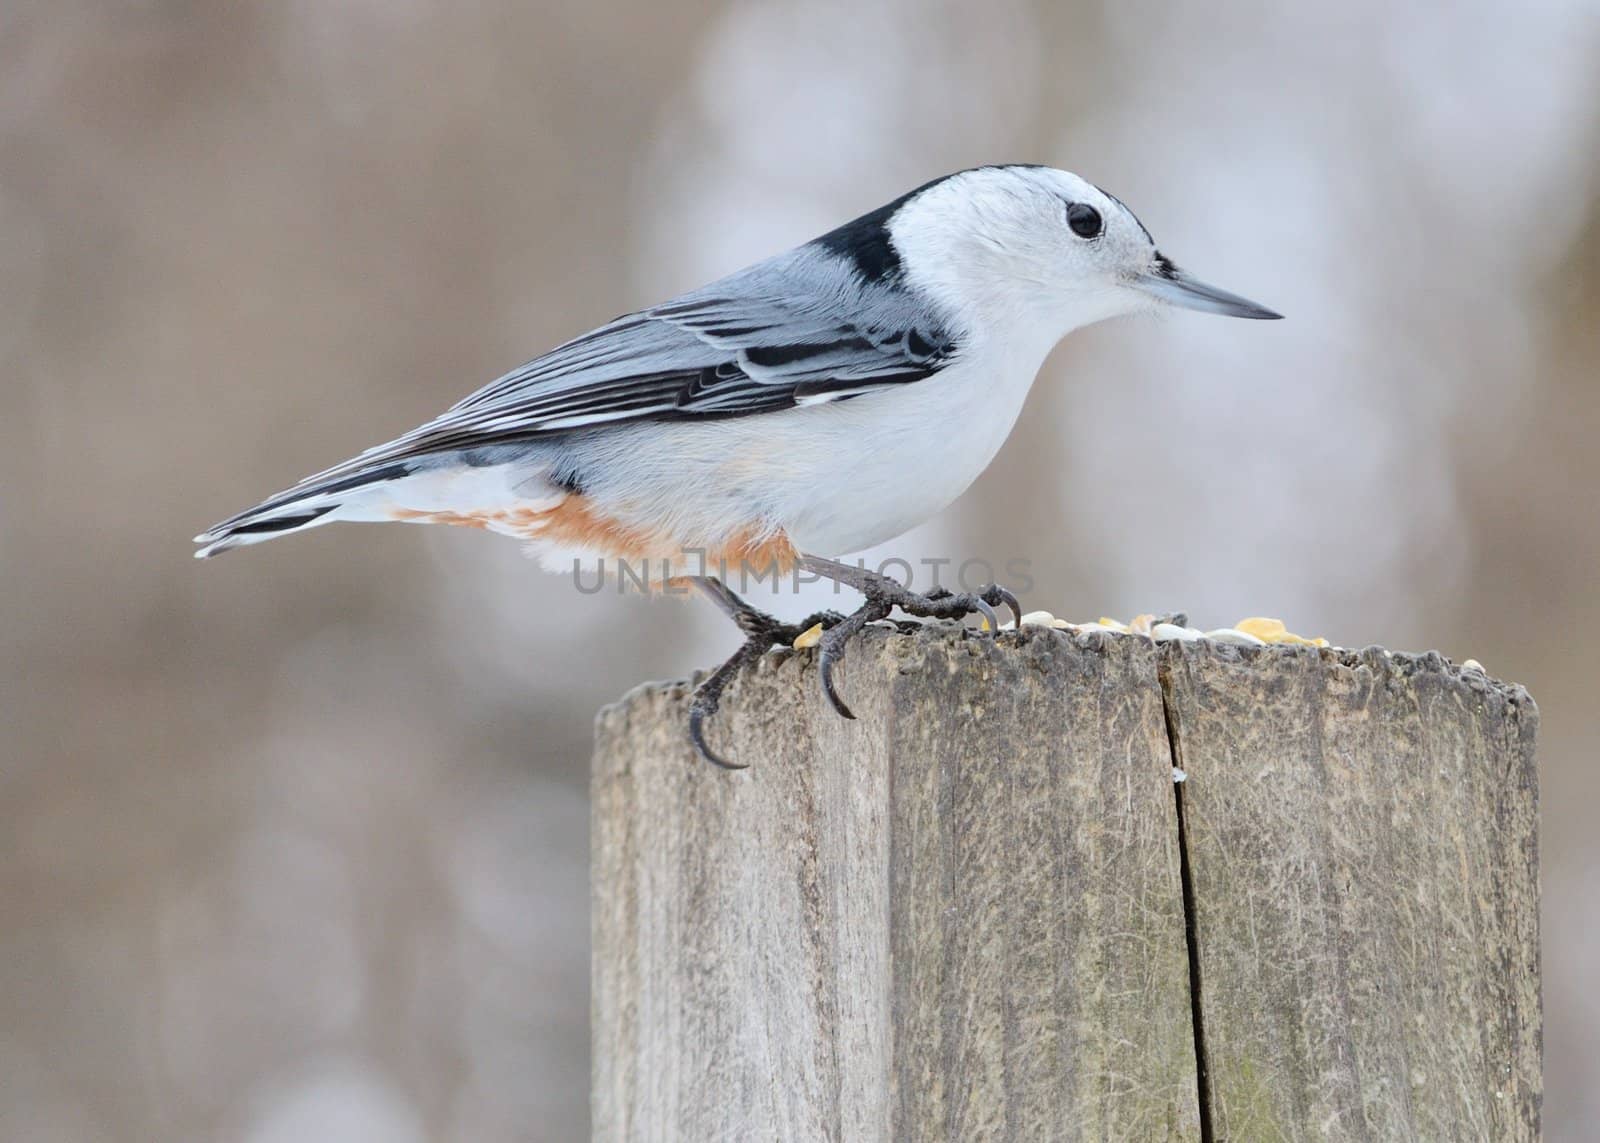 A nuthatch perched on a wooden post.